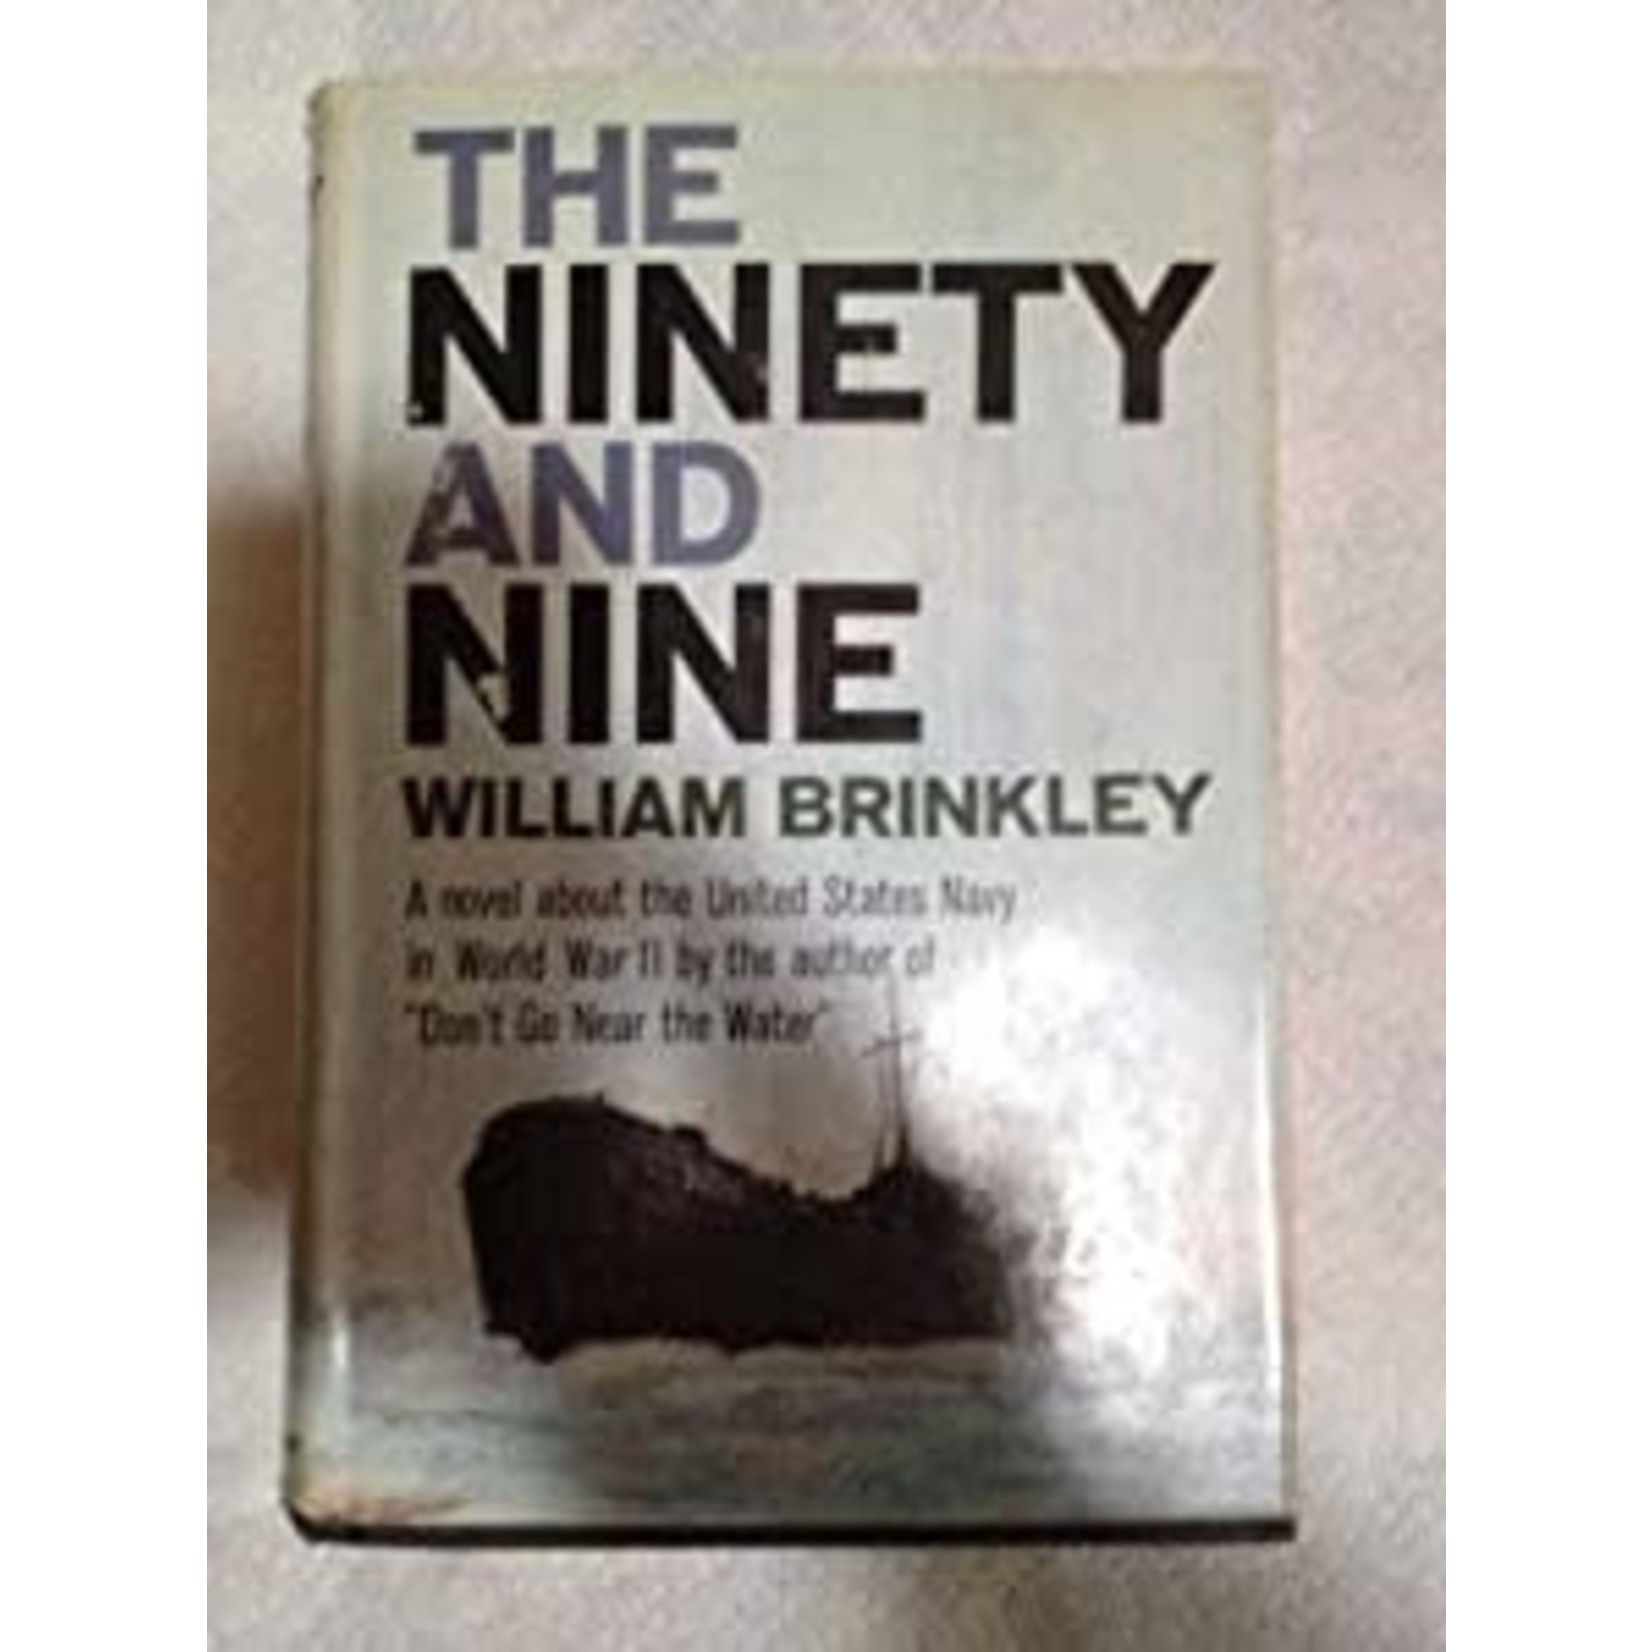 Brinkley, William Brinkley, William - The Ninety and Nine: A Novel About the United States Navy in World War II